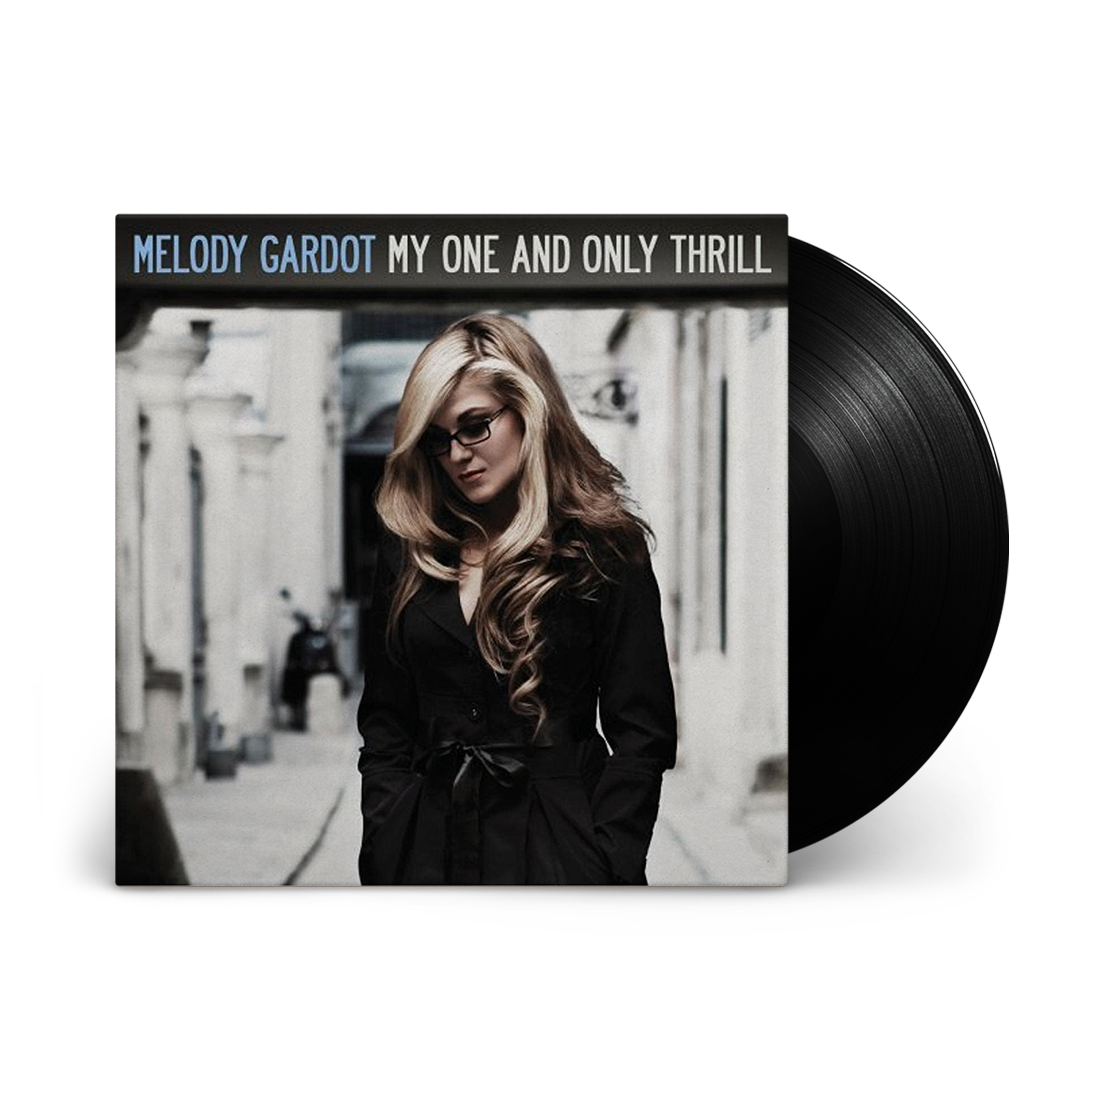 Melody Gardot - My One And Only Thrill: Vinyl LP